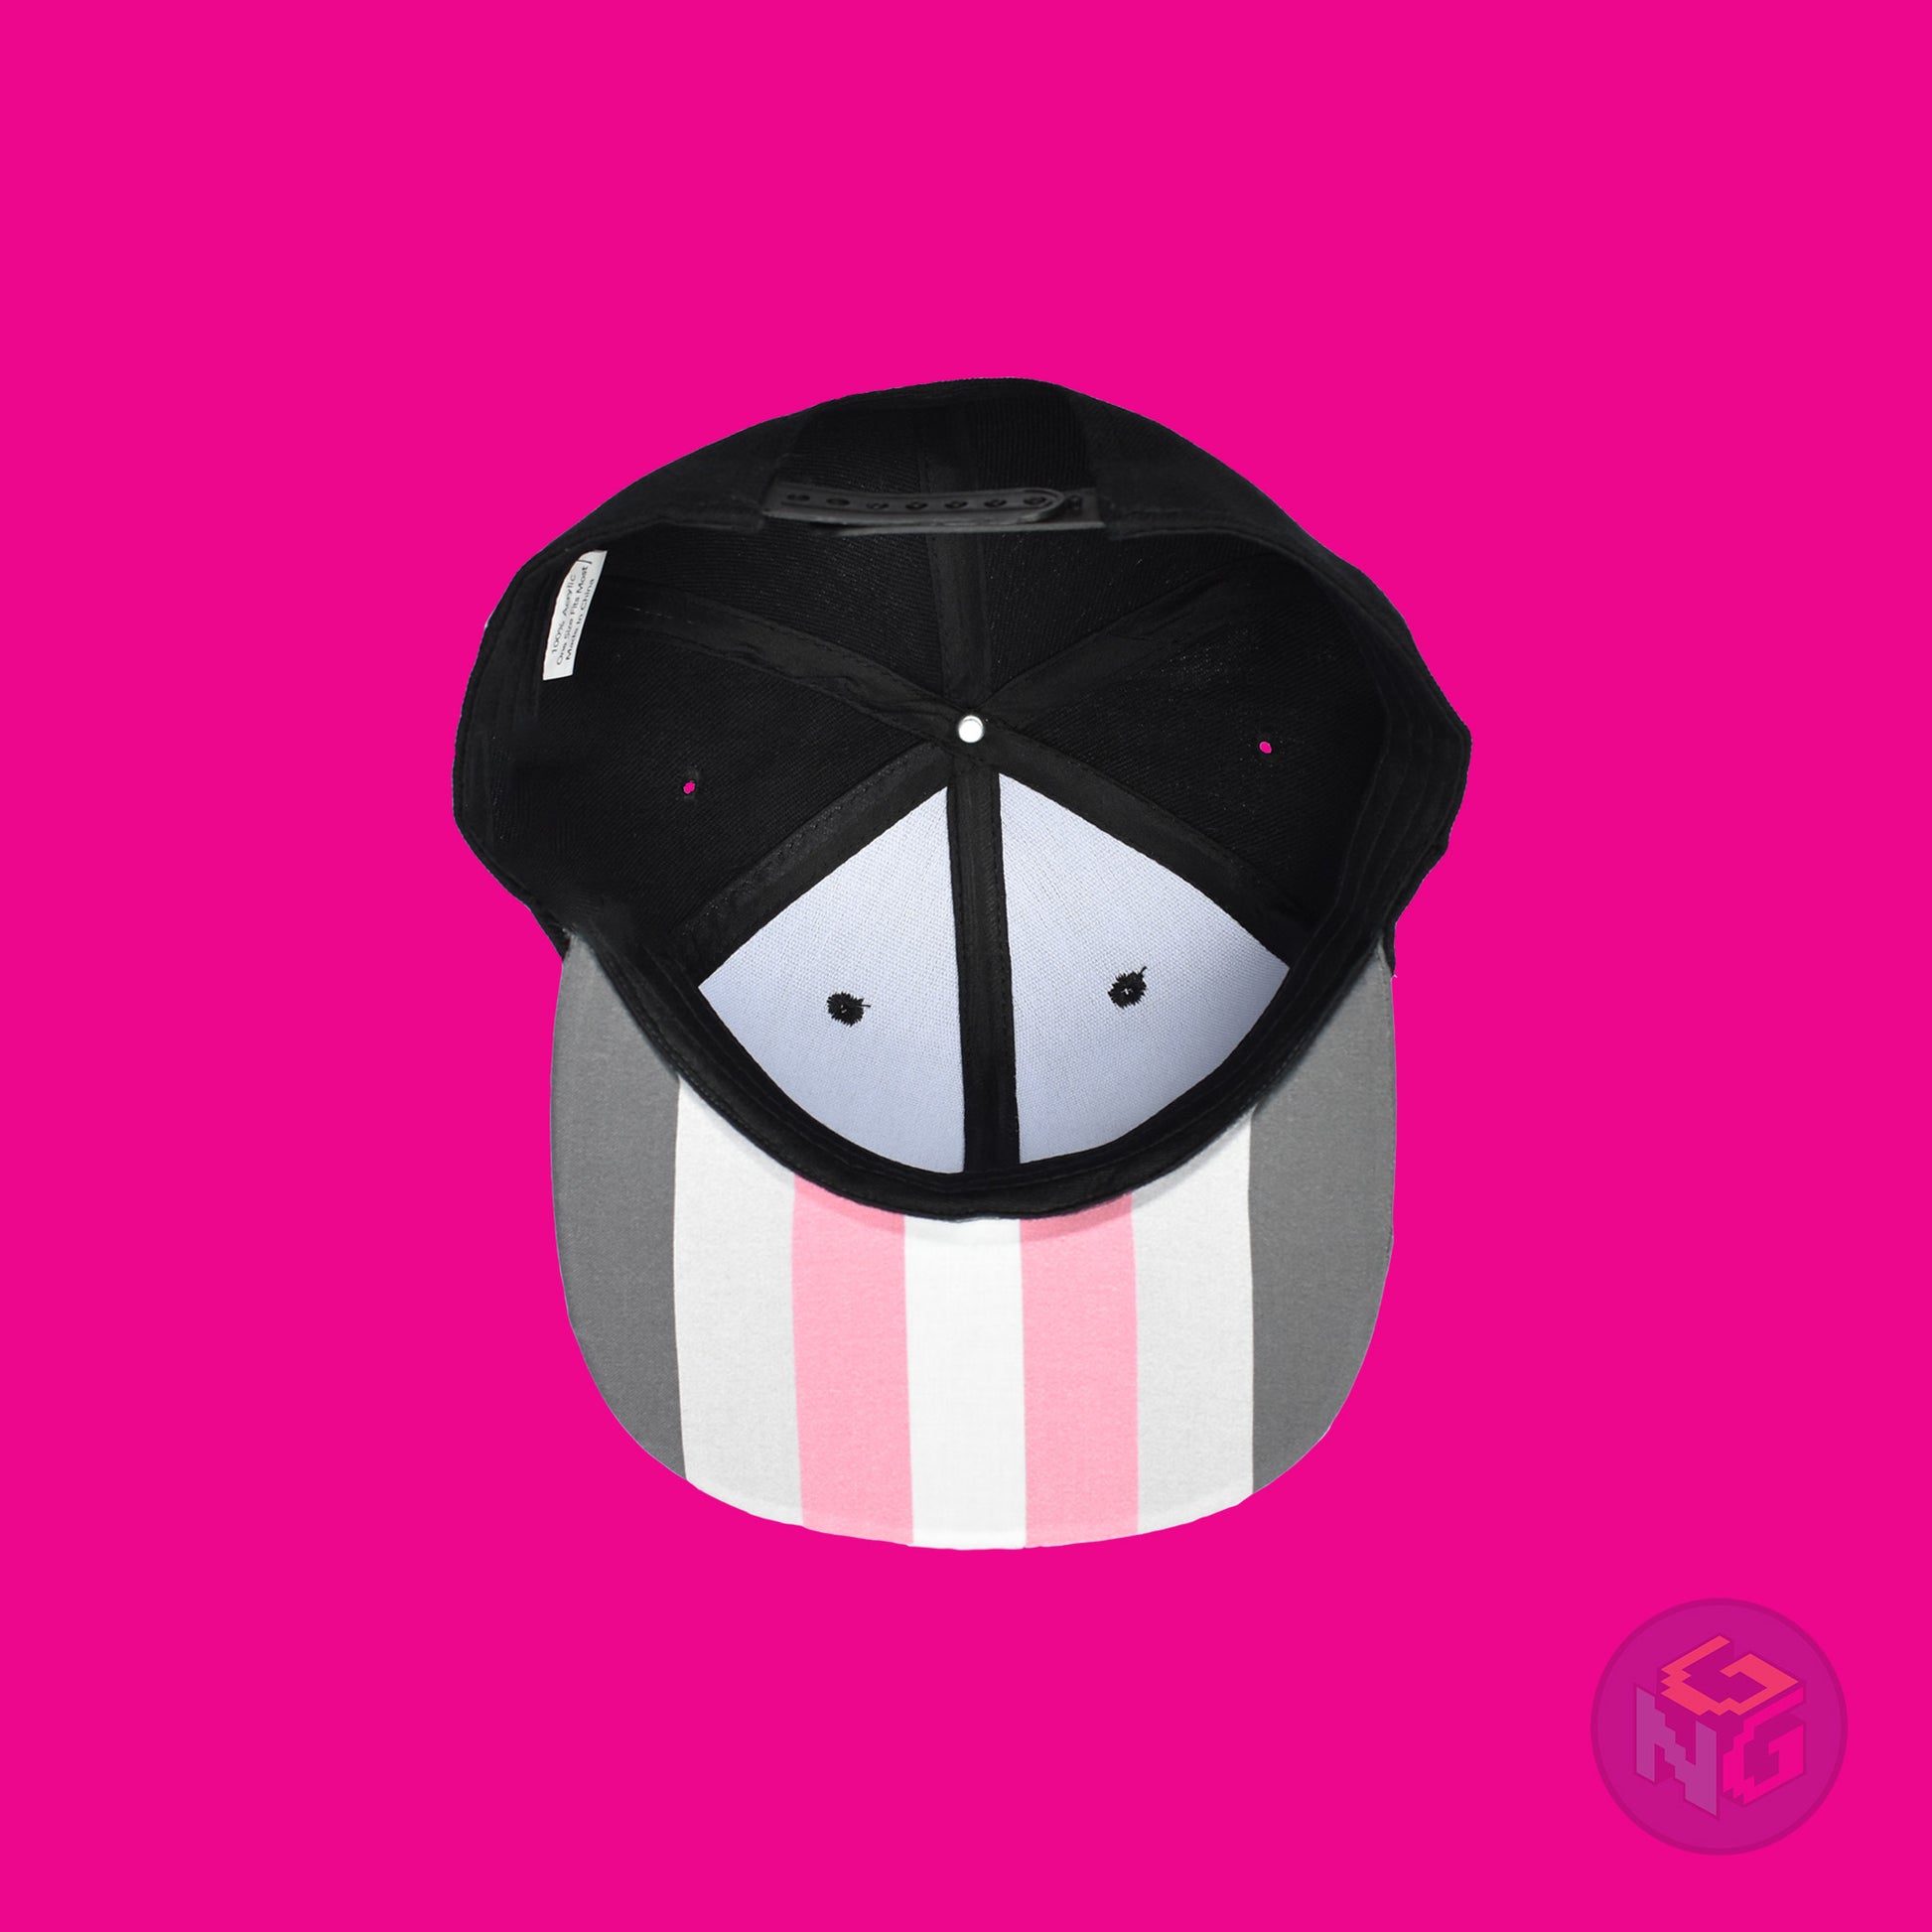 Black flat bill snapback hat. The brim has the demigirl pride flag on both sides and the front of the hat has the word “DEMI” in dark grey, light grey, pink, and white. Underside view